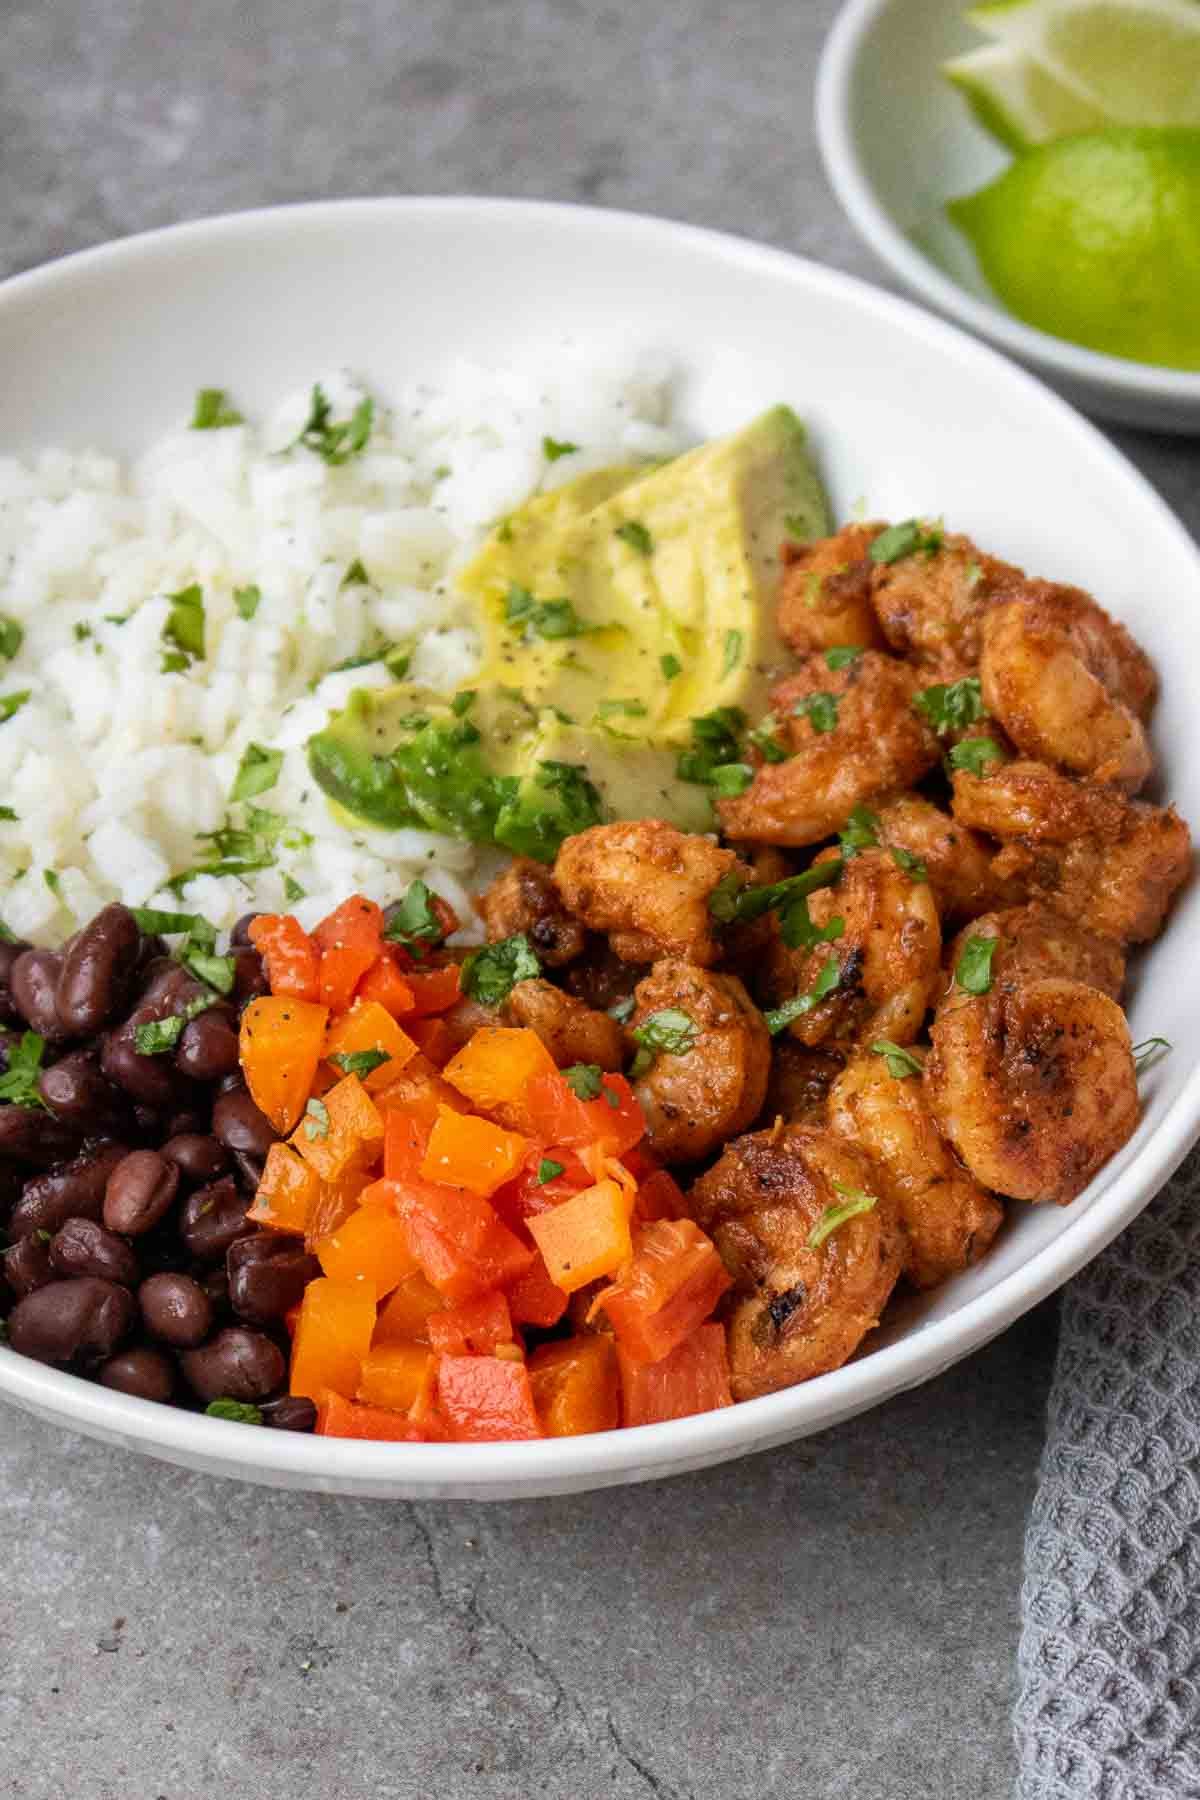 Bowl with rice, black beans, bell peppers, avocado and blackened shrimp with cilantro and lime wedges.